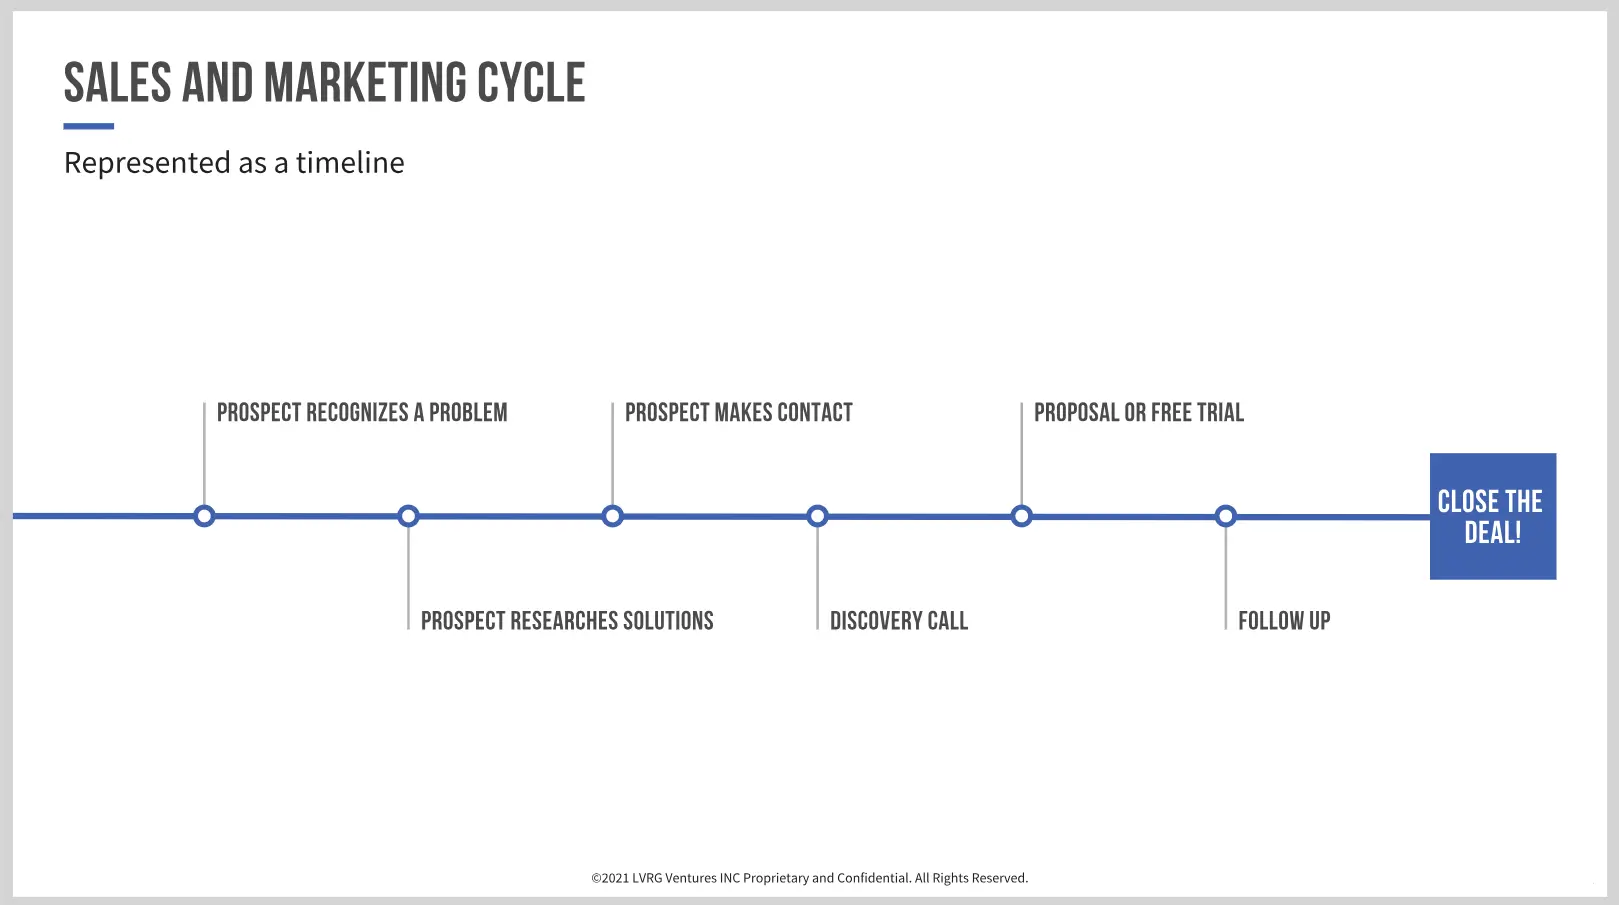 Saleseand marketing cycle